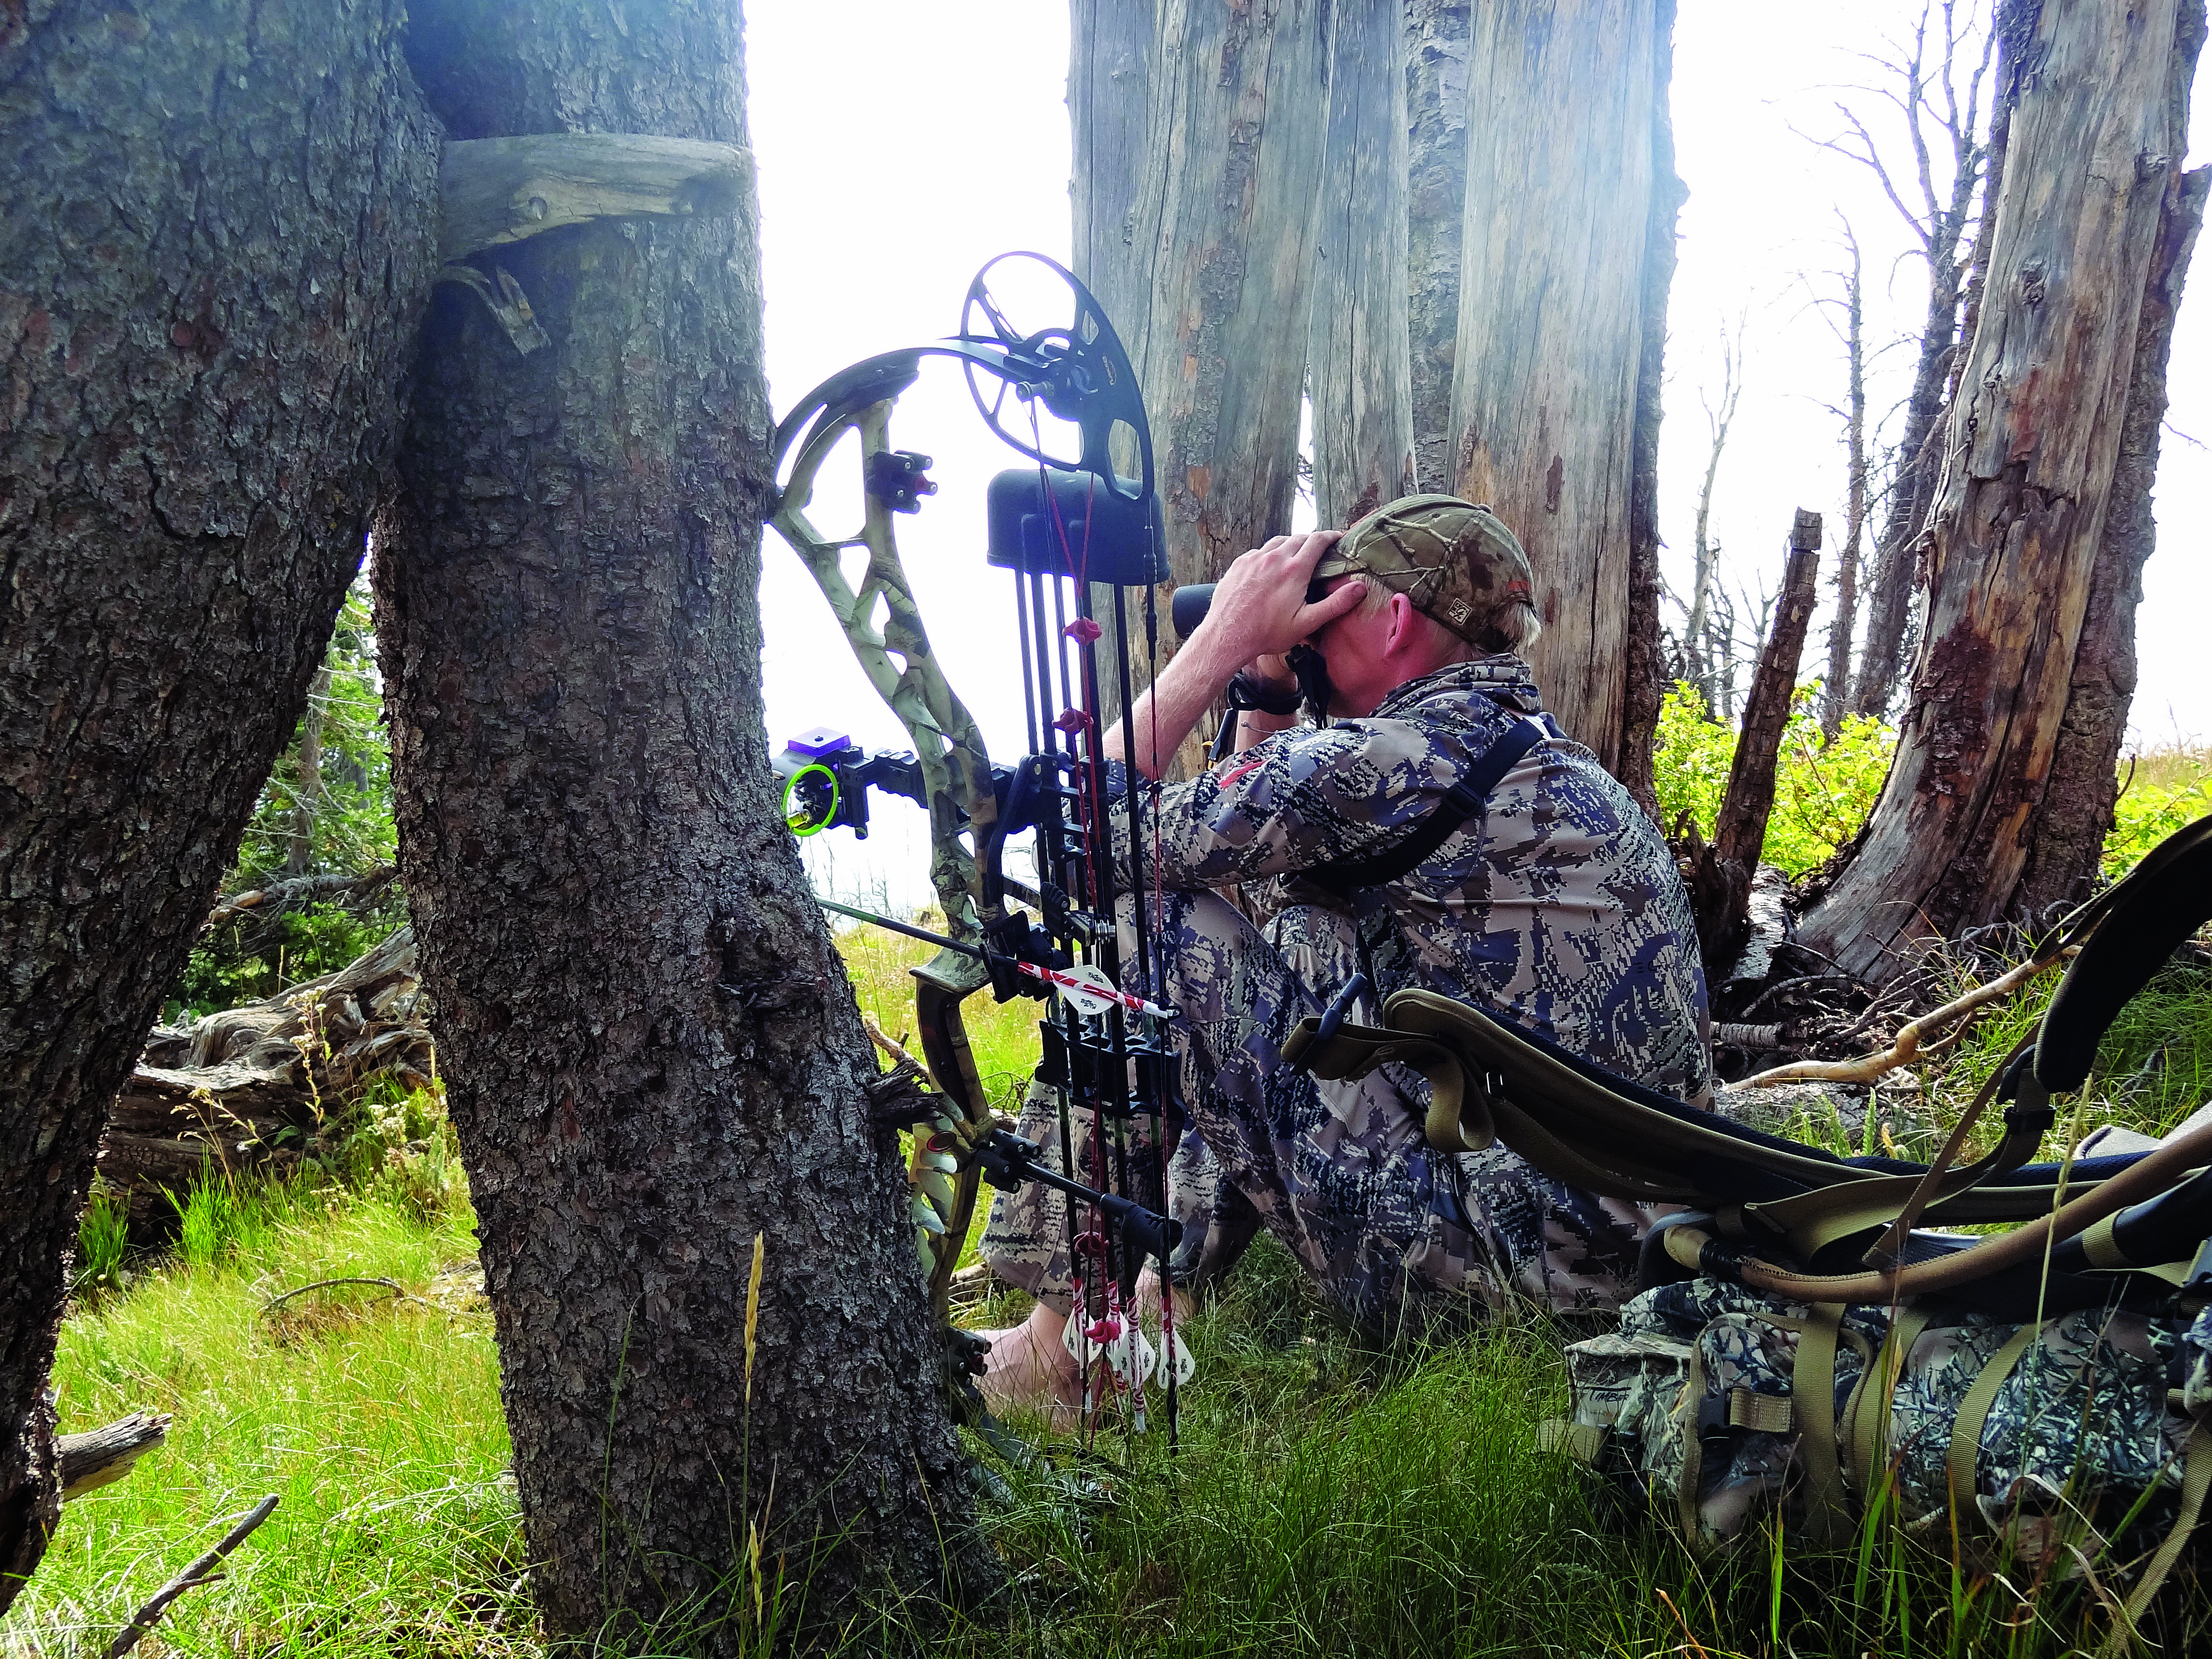 Glassing during a spot-and-stalk hunting with a bow.